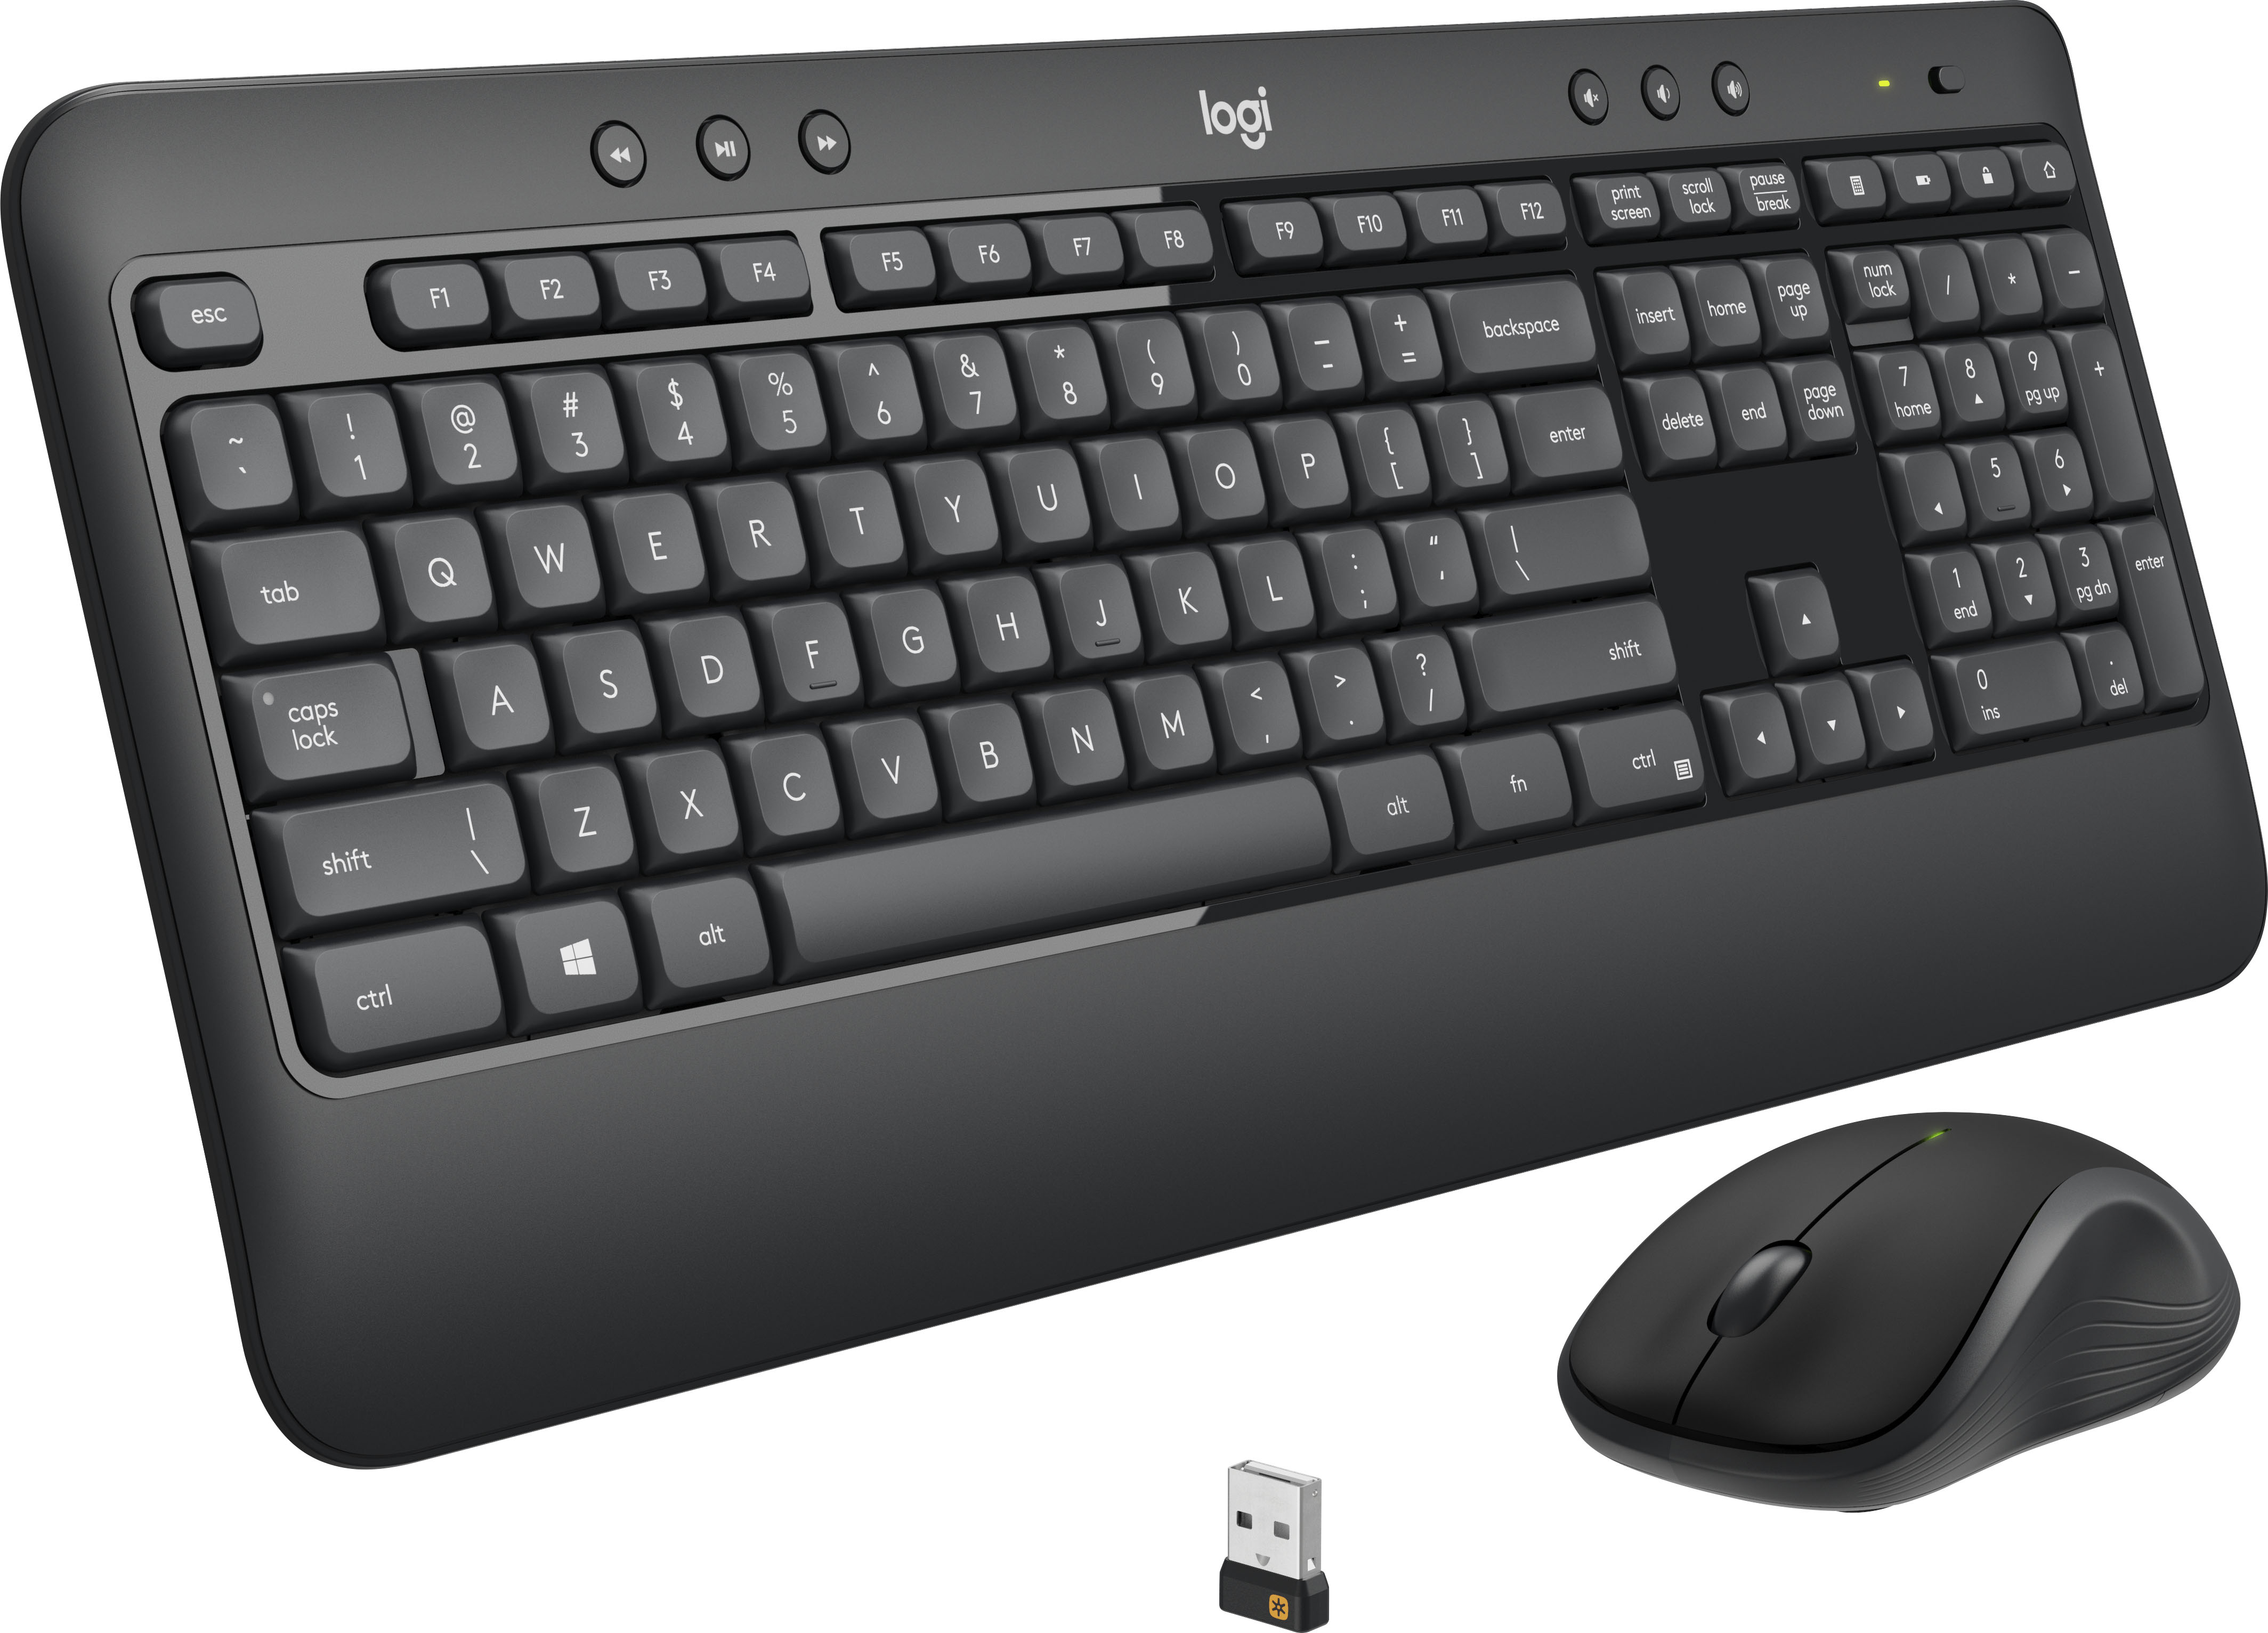 Logitech MK540 Combo - Black Buy for Full-size Keyboard Mouse 920-008671 Best Wireless Advanced Membrane PC and